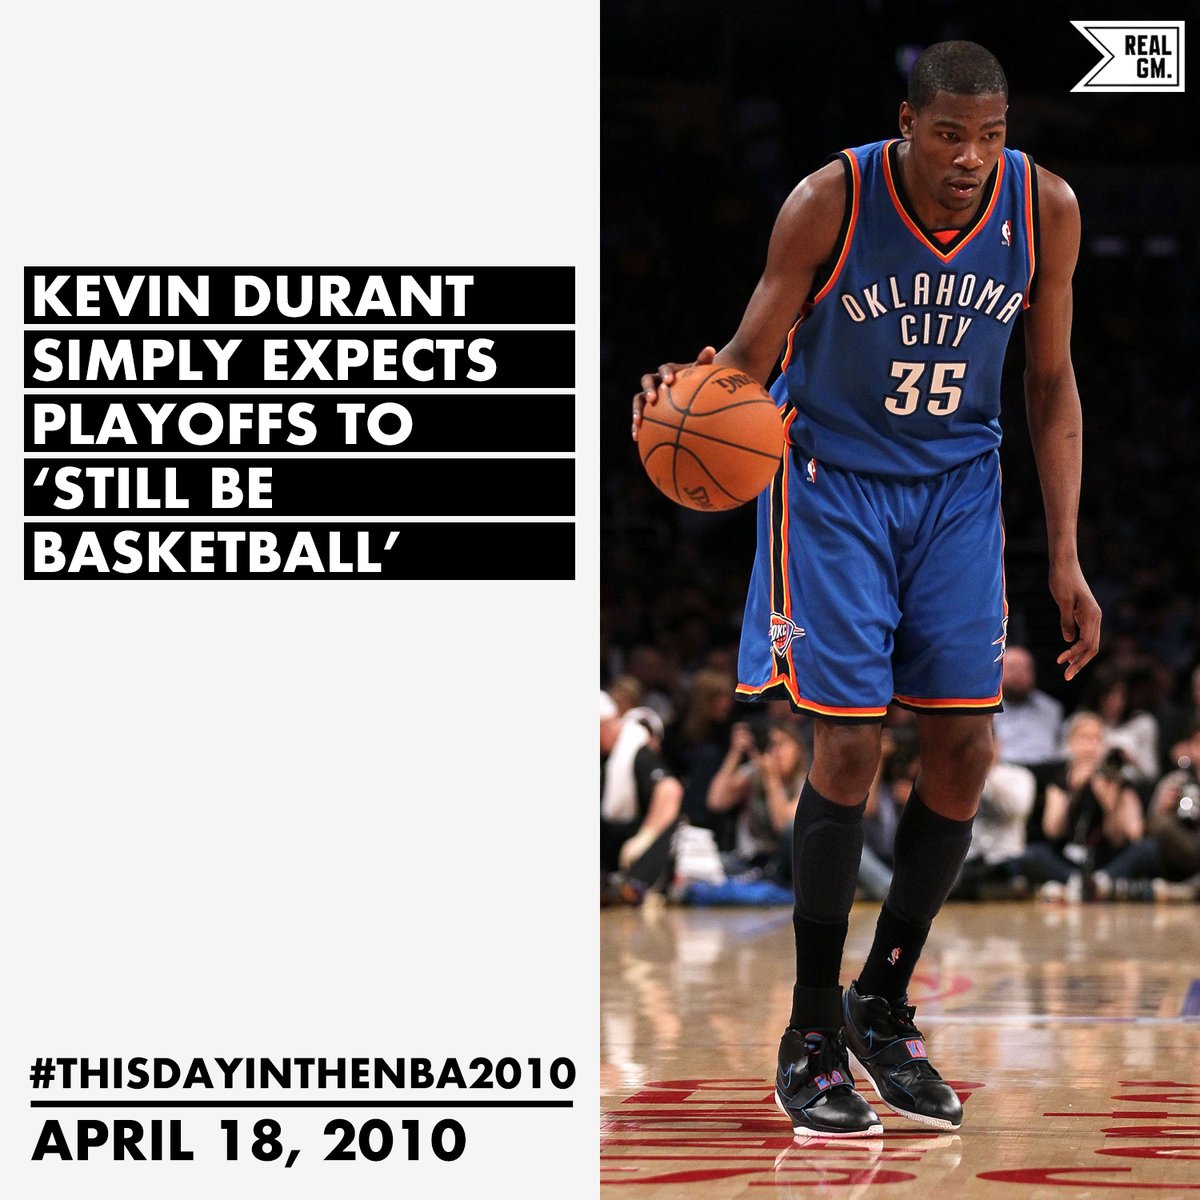  #ThisDayInTheNBA2010April 18, 2010Kevin Durant Simply Expects Playoffs To 'Still Be Basketball' https://basketball.realgm.com/wiretap/203371/Kevin-Durant-Simply-Expects-Playoffs-To-Still-Be-Basketball